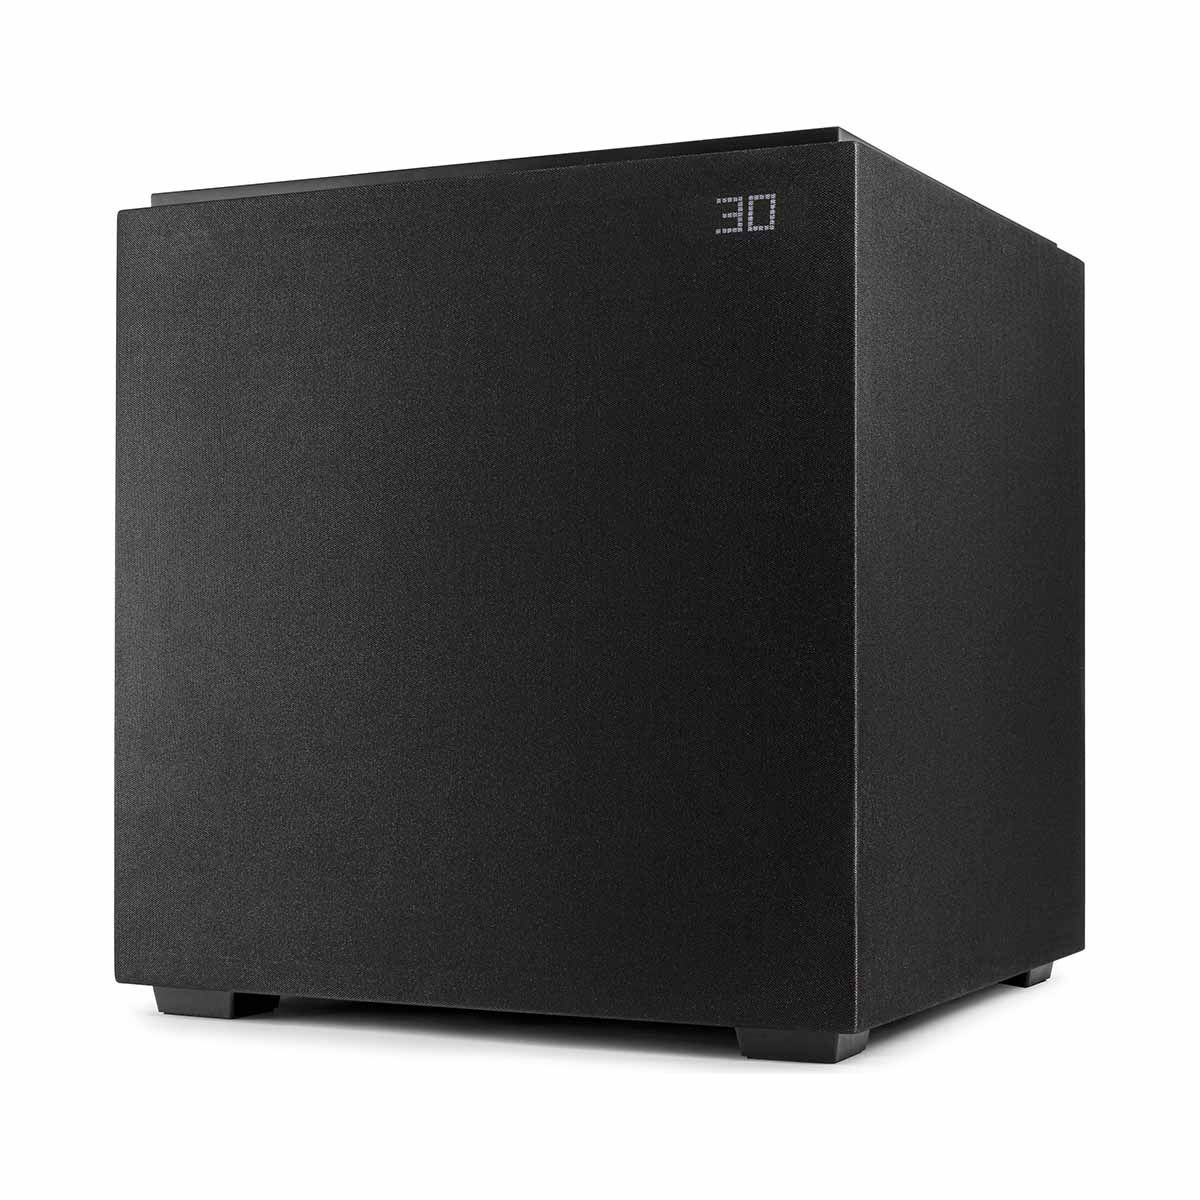 Definitive Technology Descend Series DN15 15” Subwoofer  - angled front view